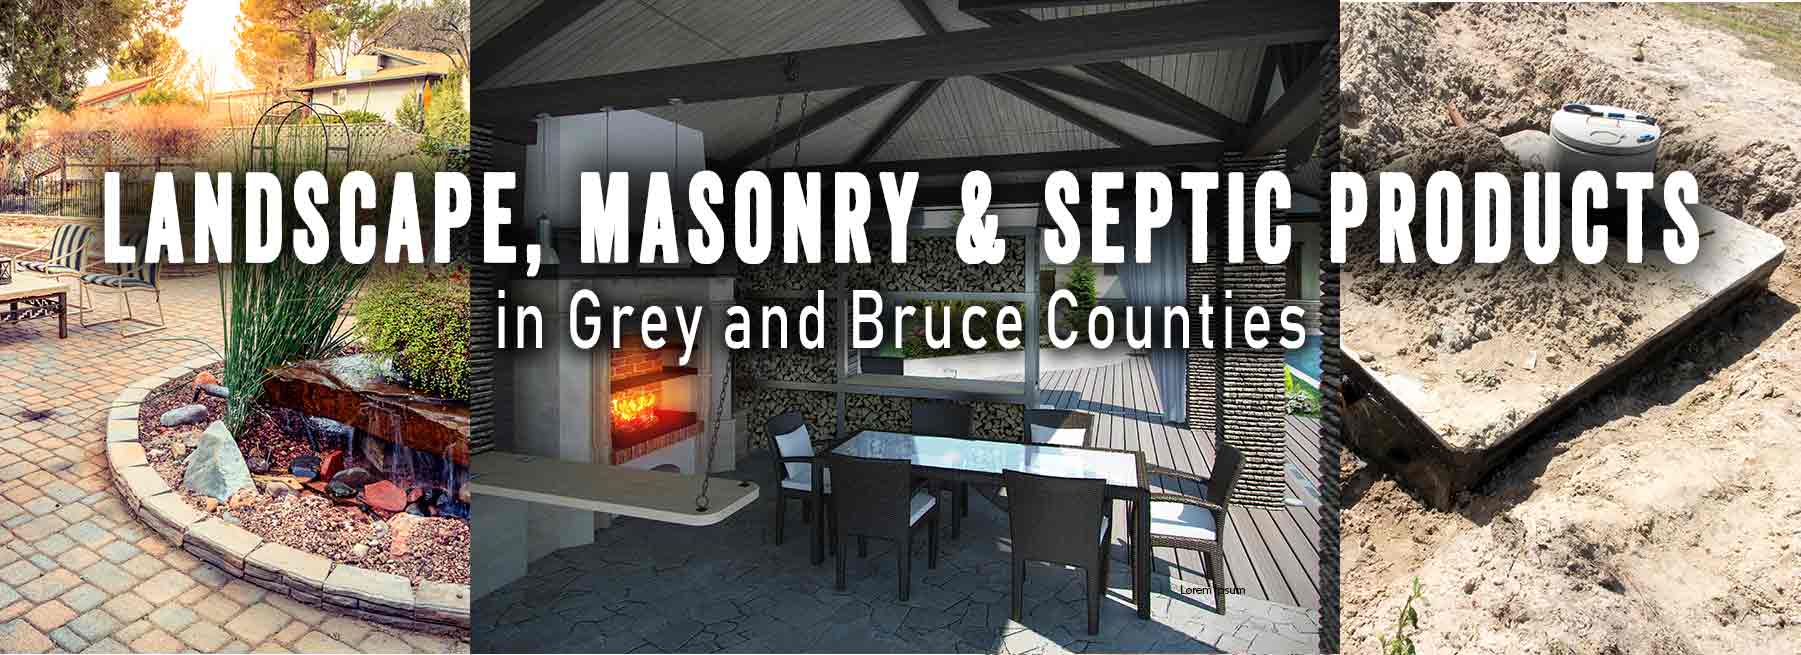 LANDSCAPE, MASONRY & SEPTIC PRODUCTS in Dufferin County